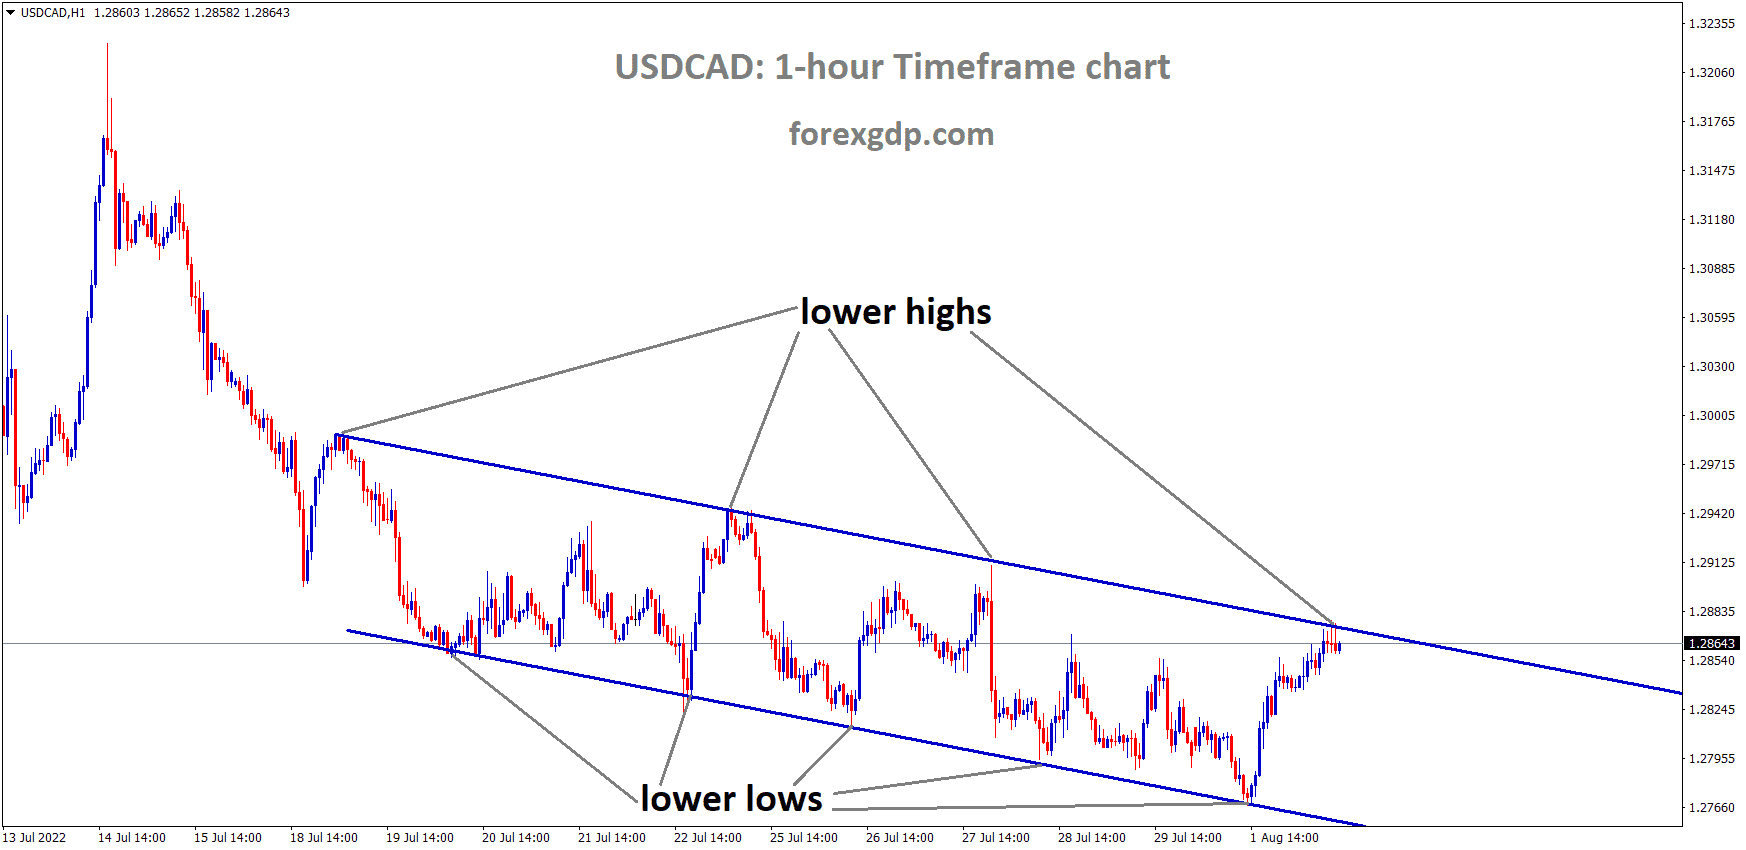 USDCAD is moving in the Descending channel and the Market has reached the Lower high area of the channel.